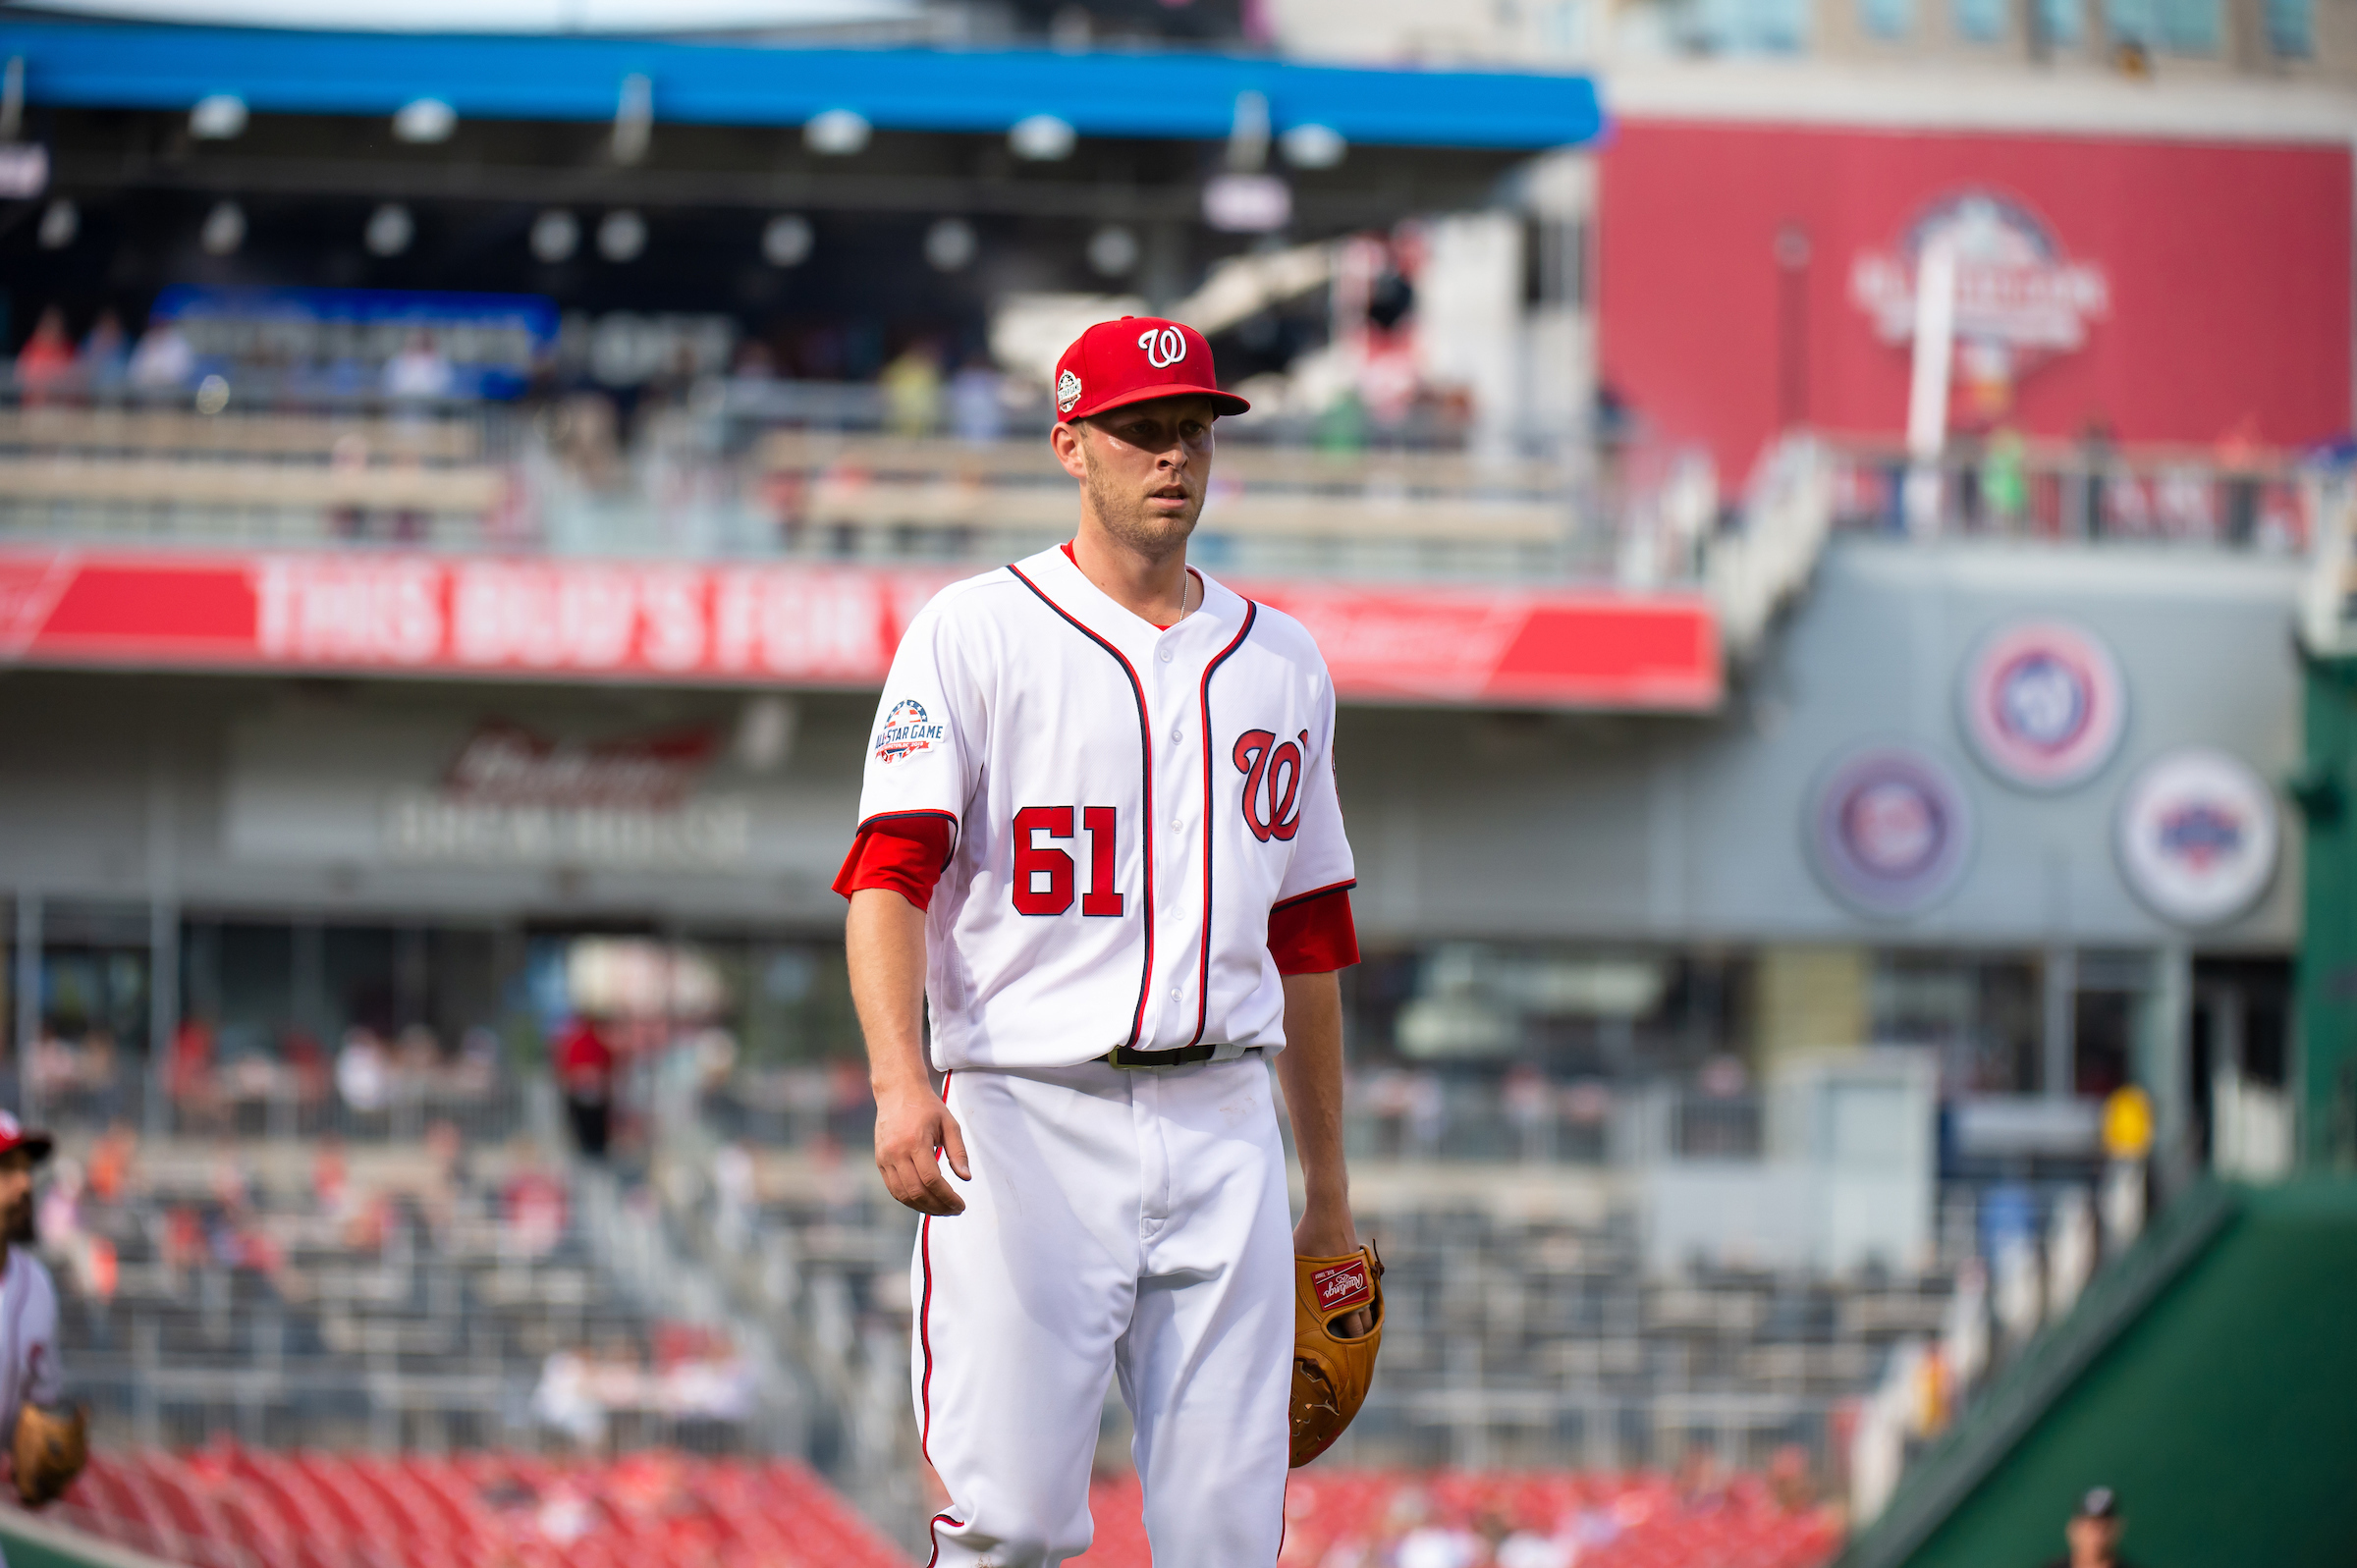 Kyle McGowin, a 2010 Pierson High School graduate,  earned a spot in the pitching rotation for the Washington Nationals earlier this year. COURTESY WASHINGTON NATIONALS BASEBALL CLUB